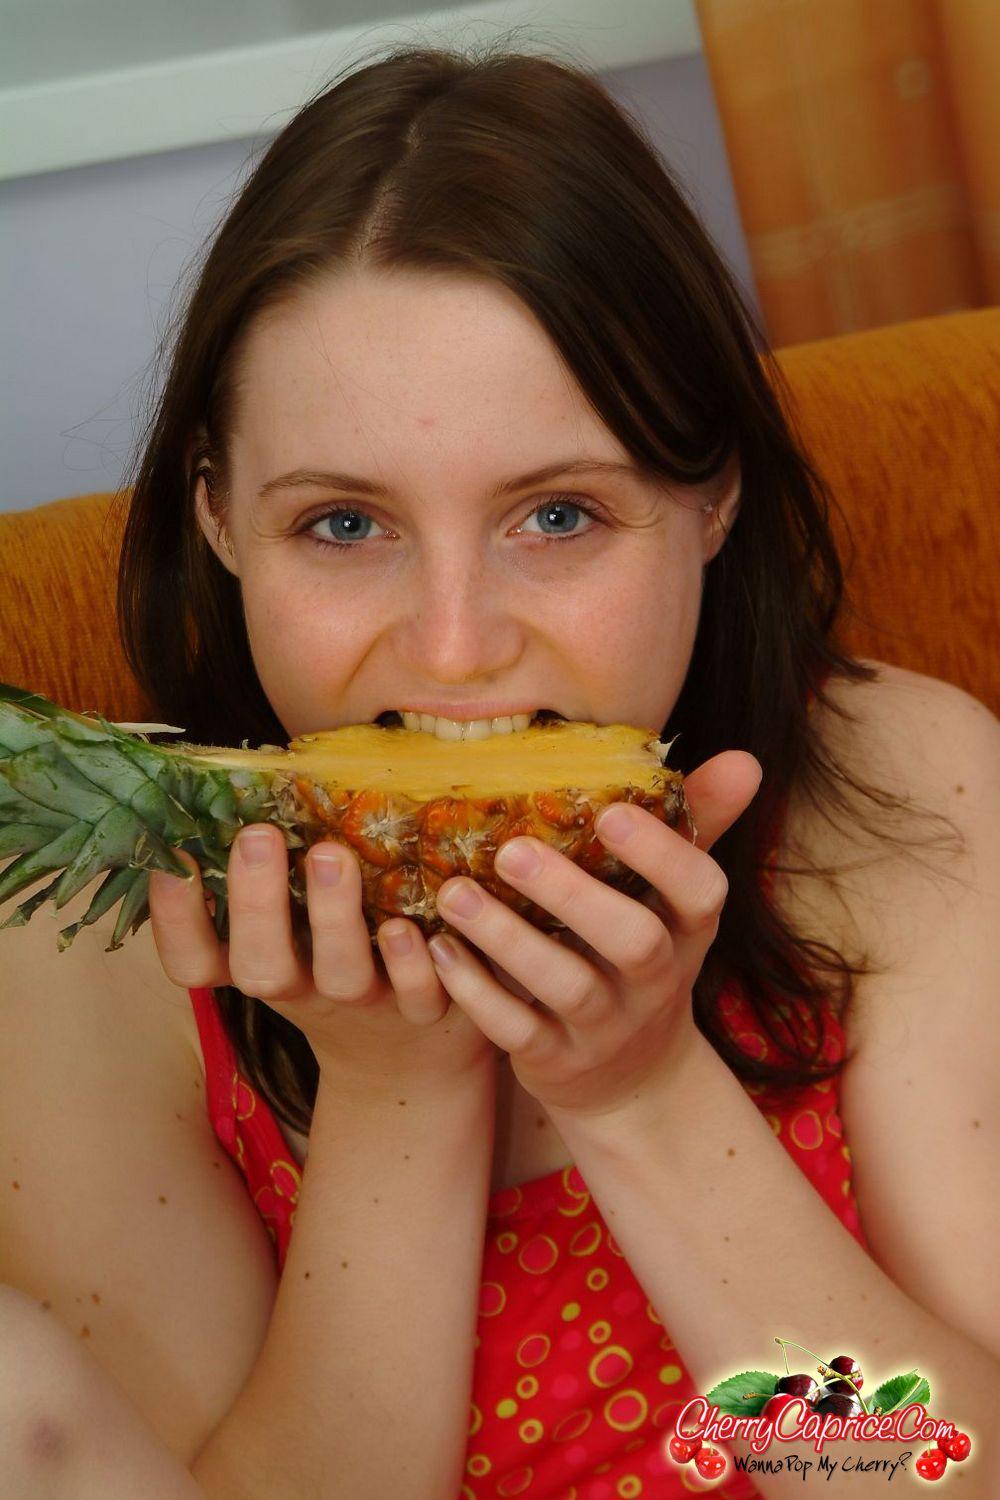 Pictures of teen Cherry Caprice getting intimate with a pineapple #53774854